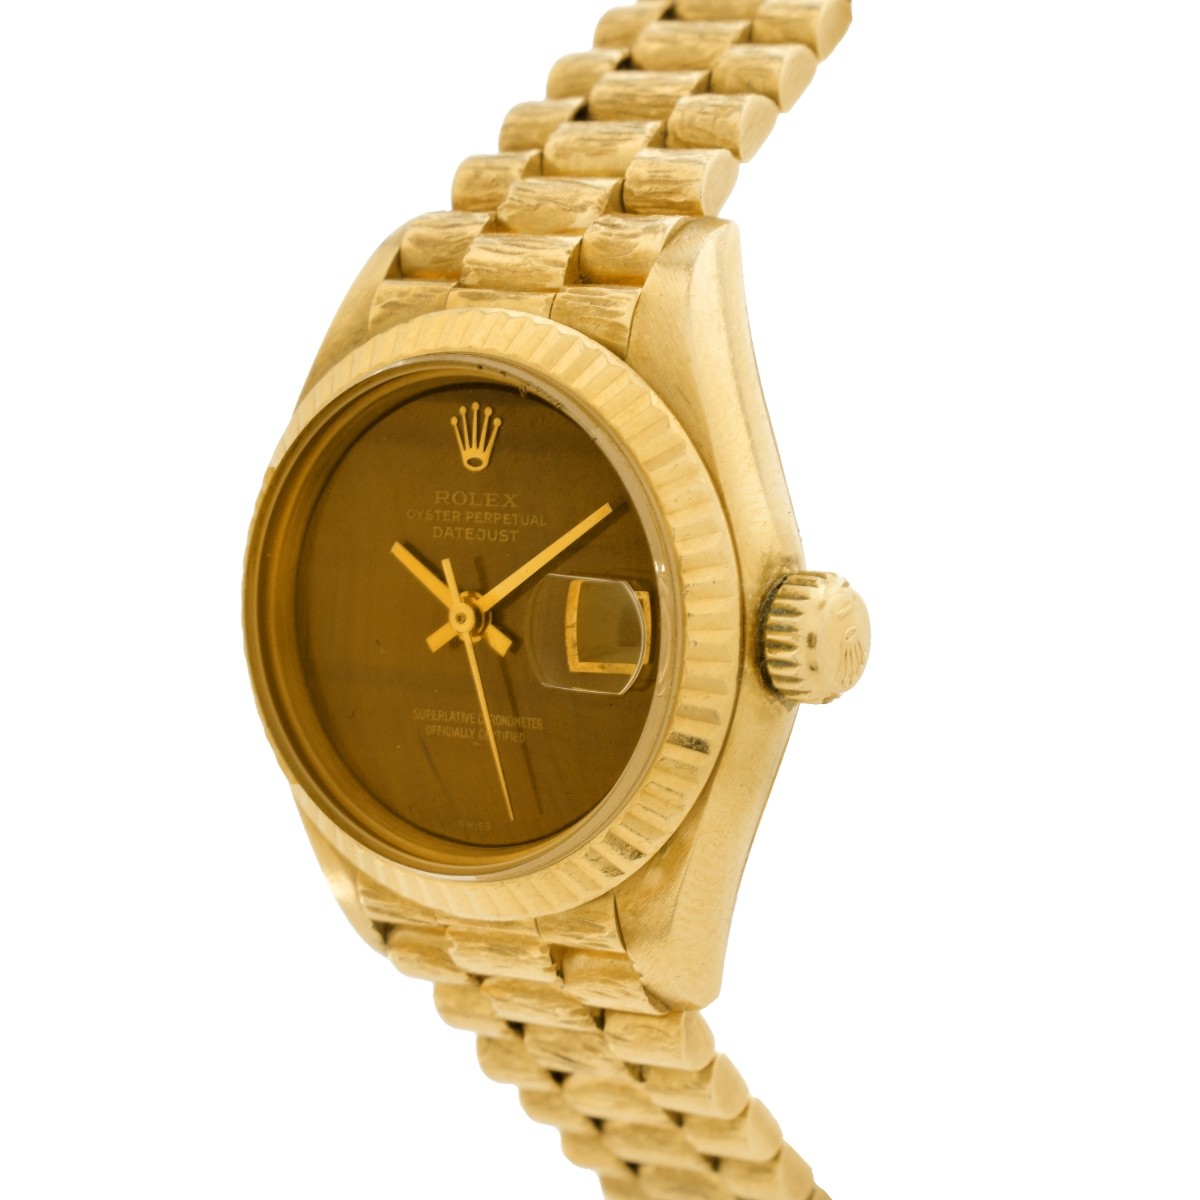 Lady's Rolex Oyster Perpetual Datejust 18K Watch